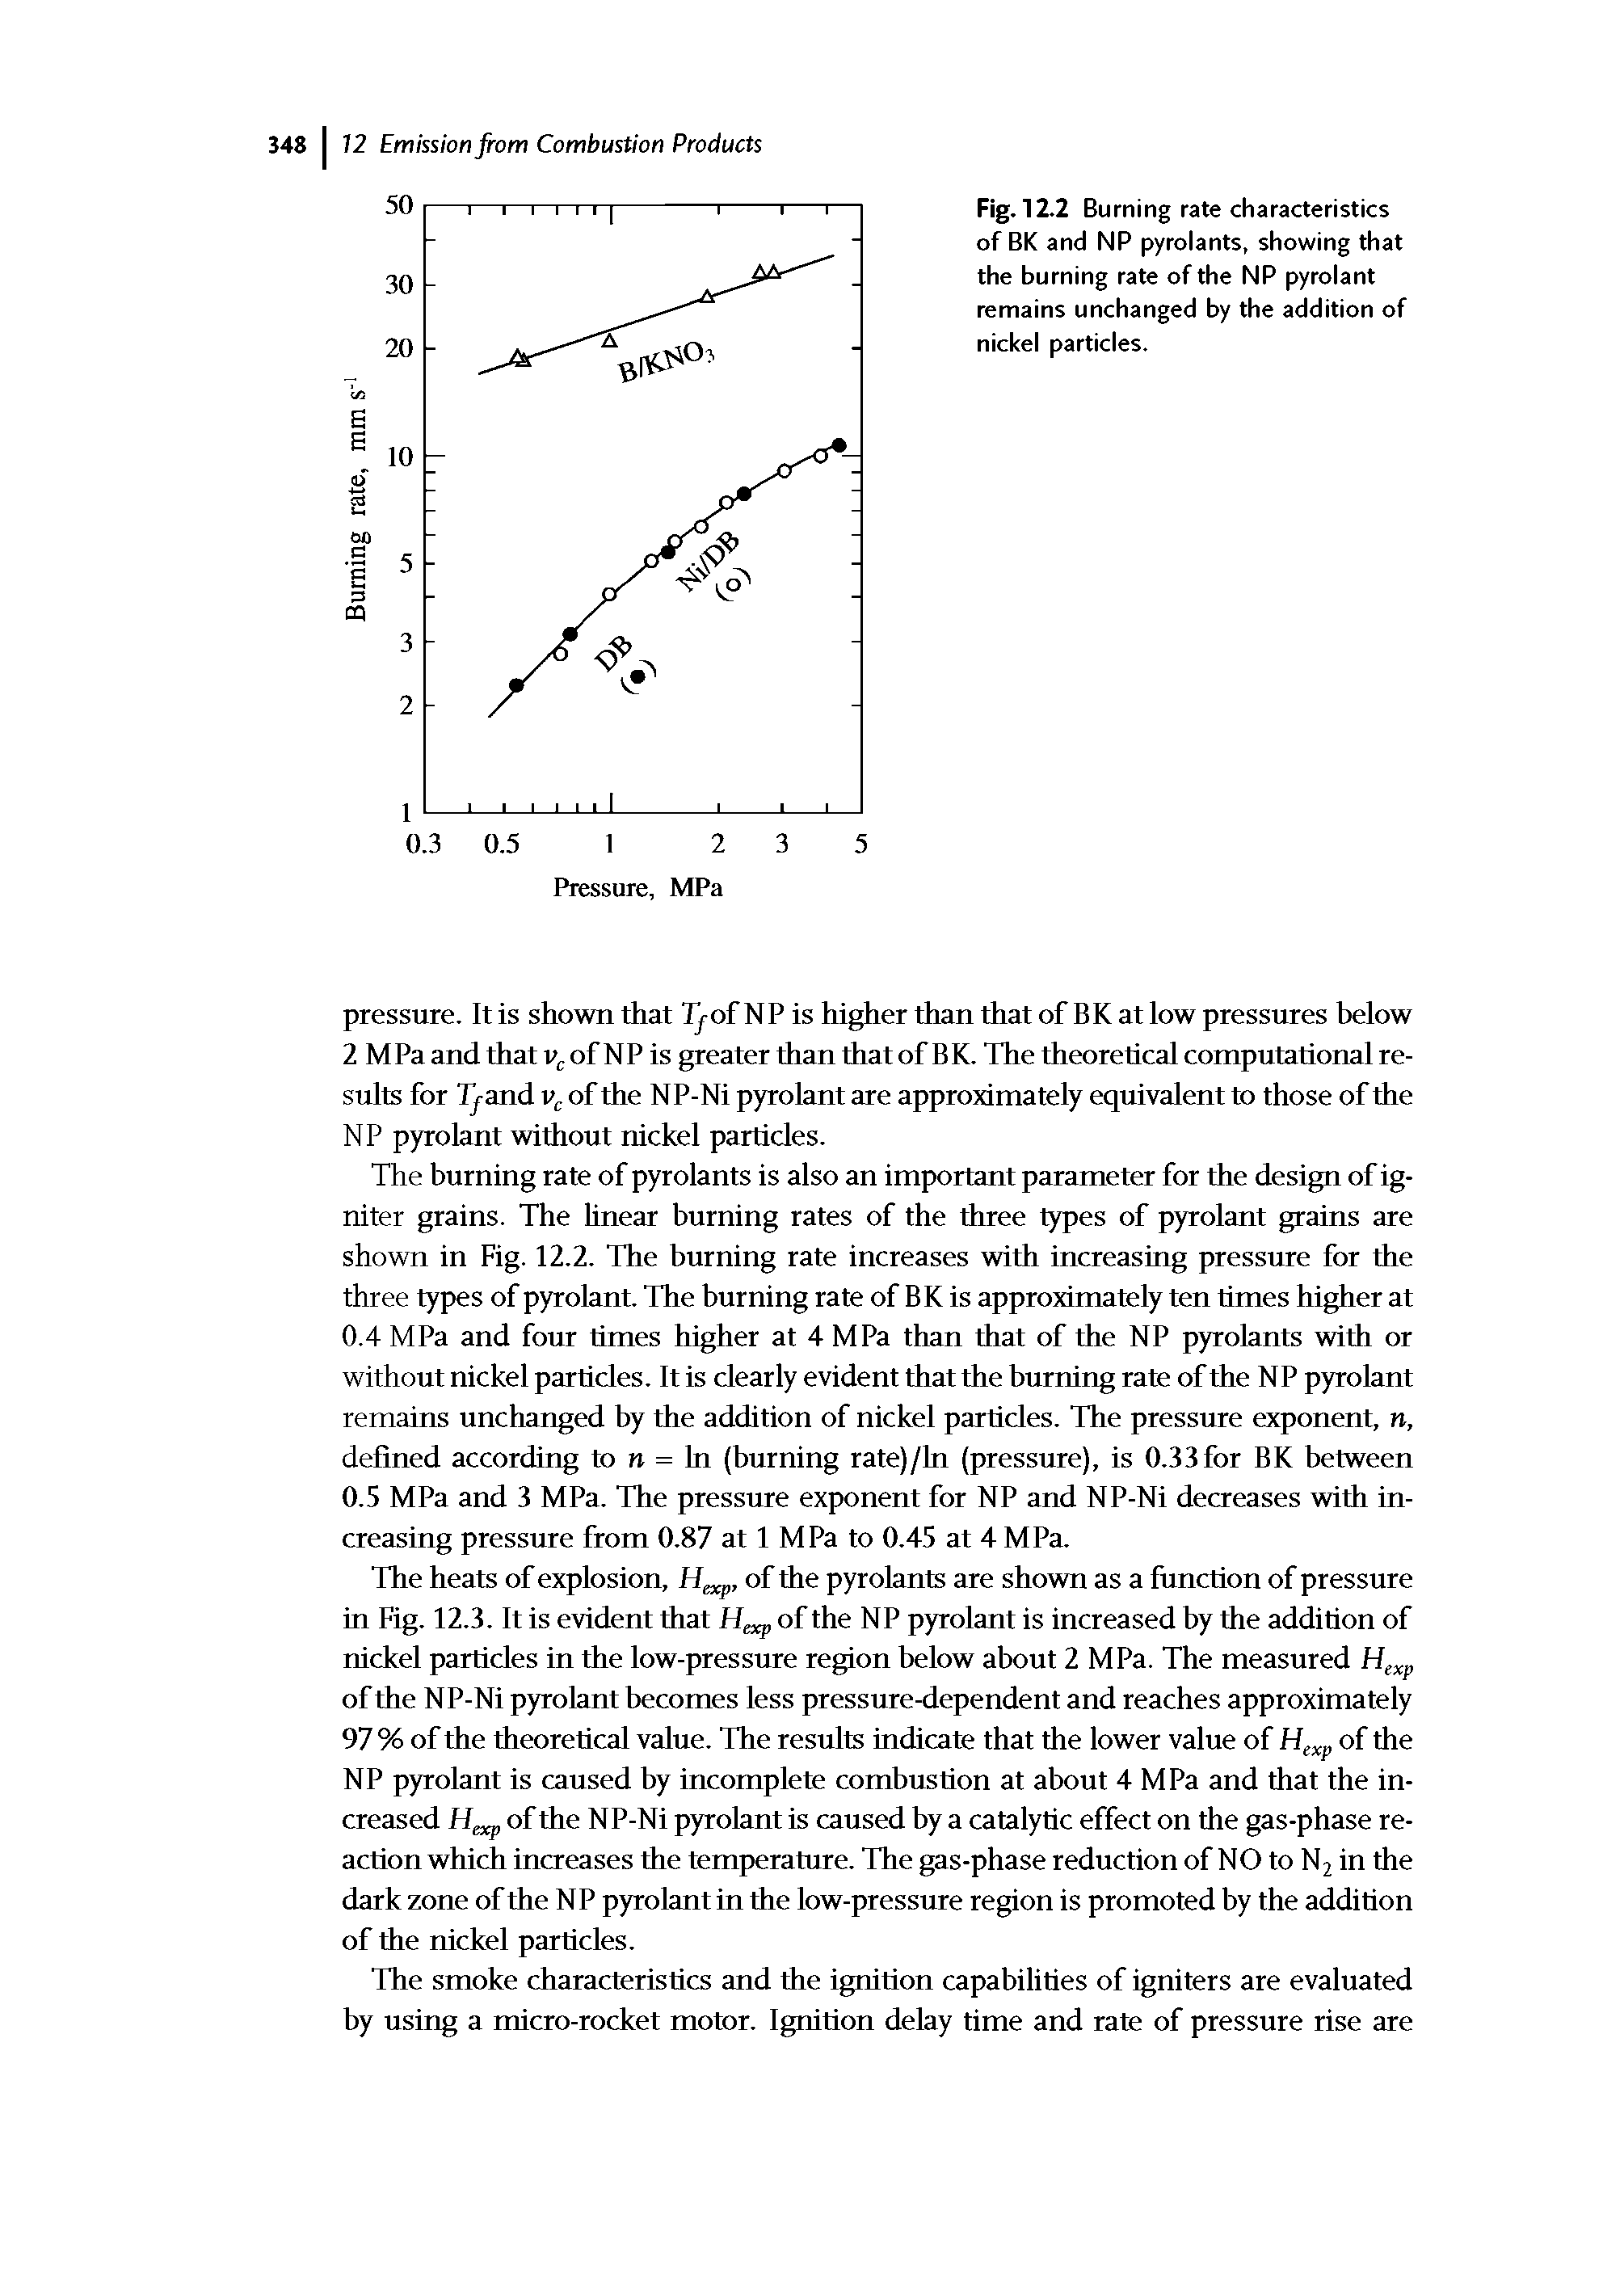 Fig. 12.2 Burning rate characteristics of BK and NP pyrolants, showing that the burning rate of the NP pyrolant remains unchanged by the addition of nickel particles.